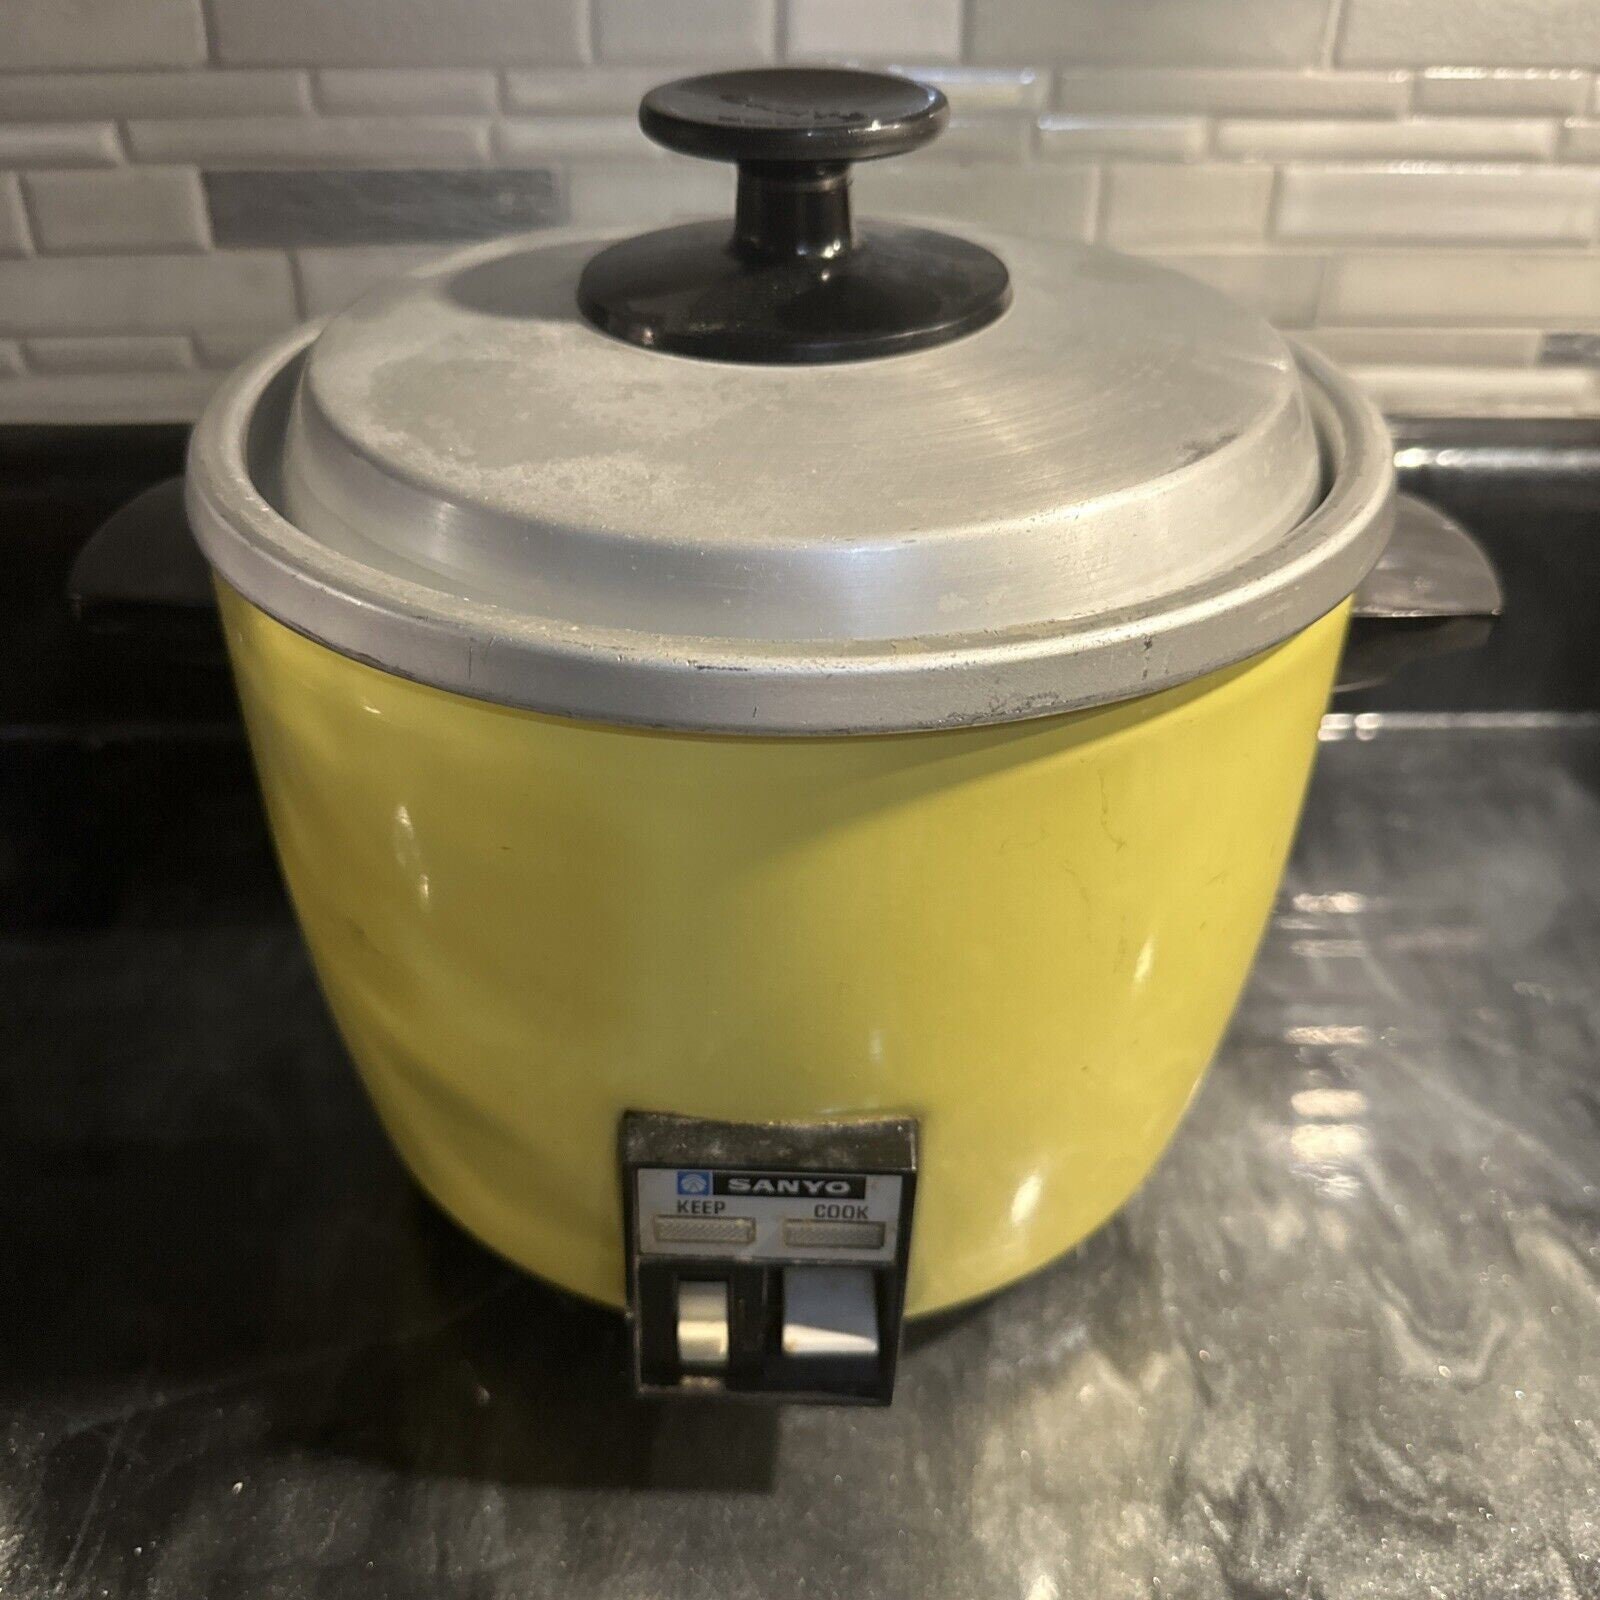 Sanyo ECJ-N55W 5.5-Cup Rice Cooker for sale online